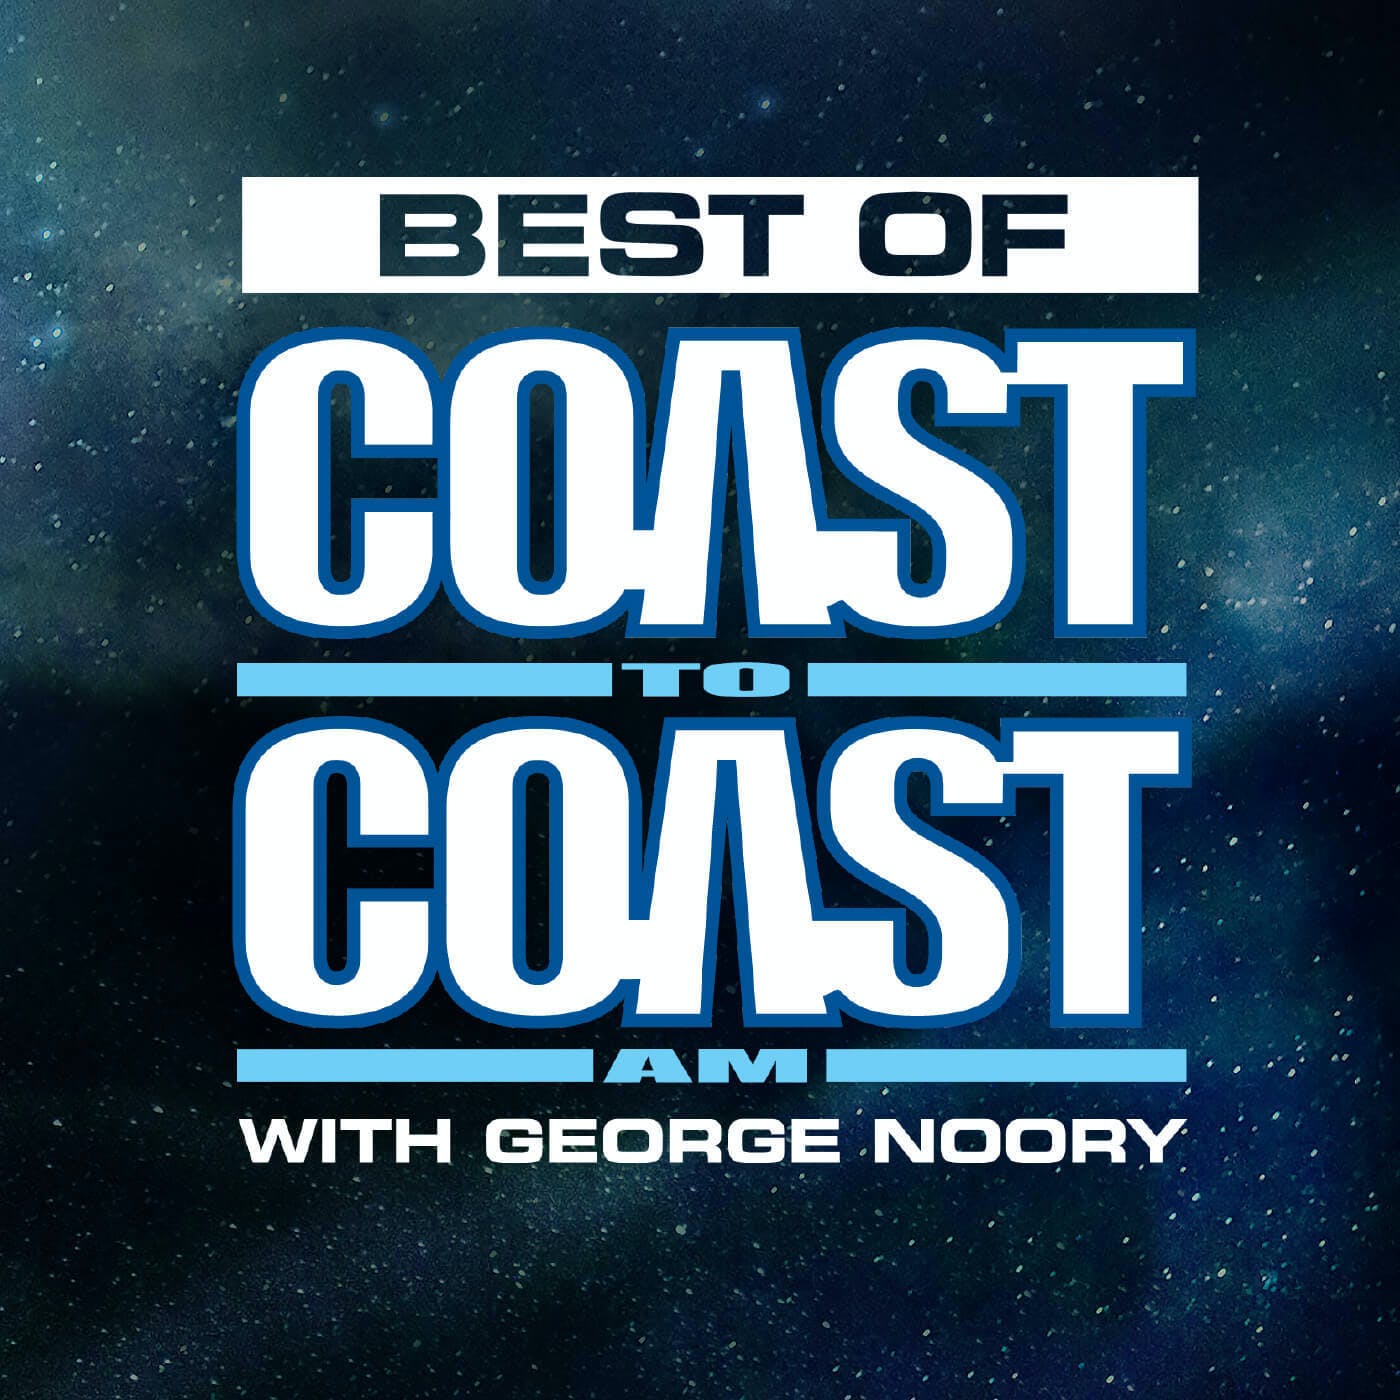 Disappearing Civilizations - Best of Coast to Coast AM - 12/1/21